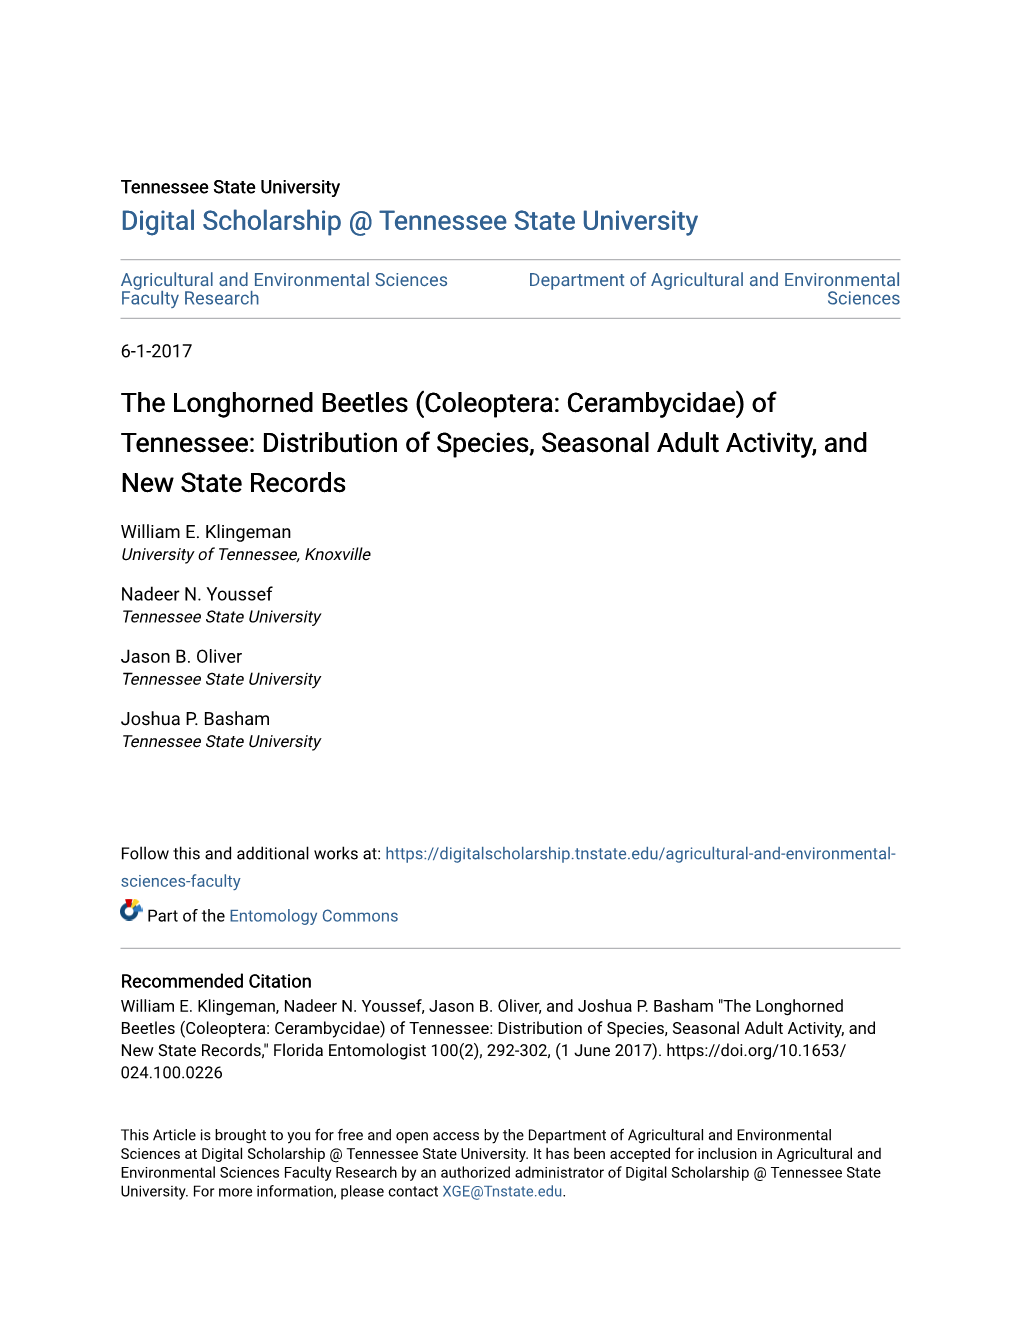 The Longhorned Beetles (Coleoptera: Cerambycidae) of Tennessee: Distribution of Species, Seasonal Adult Activity, and New State Records